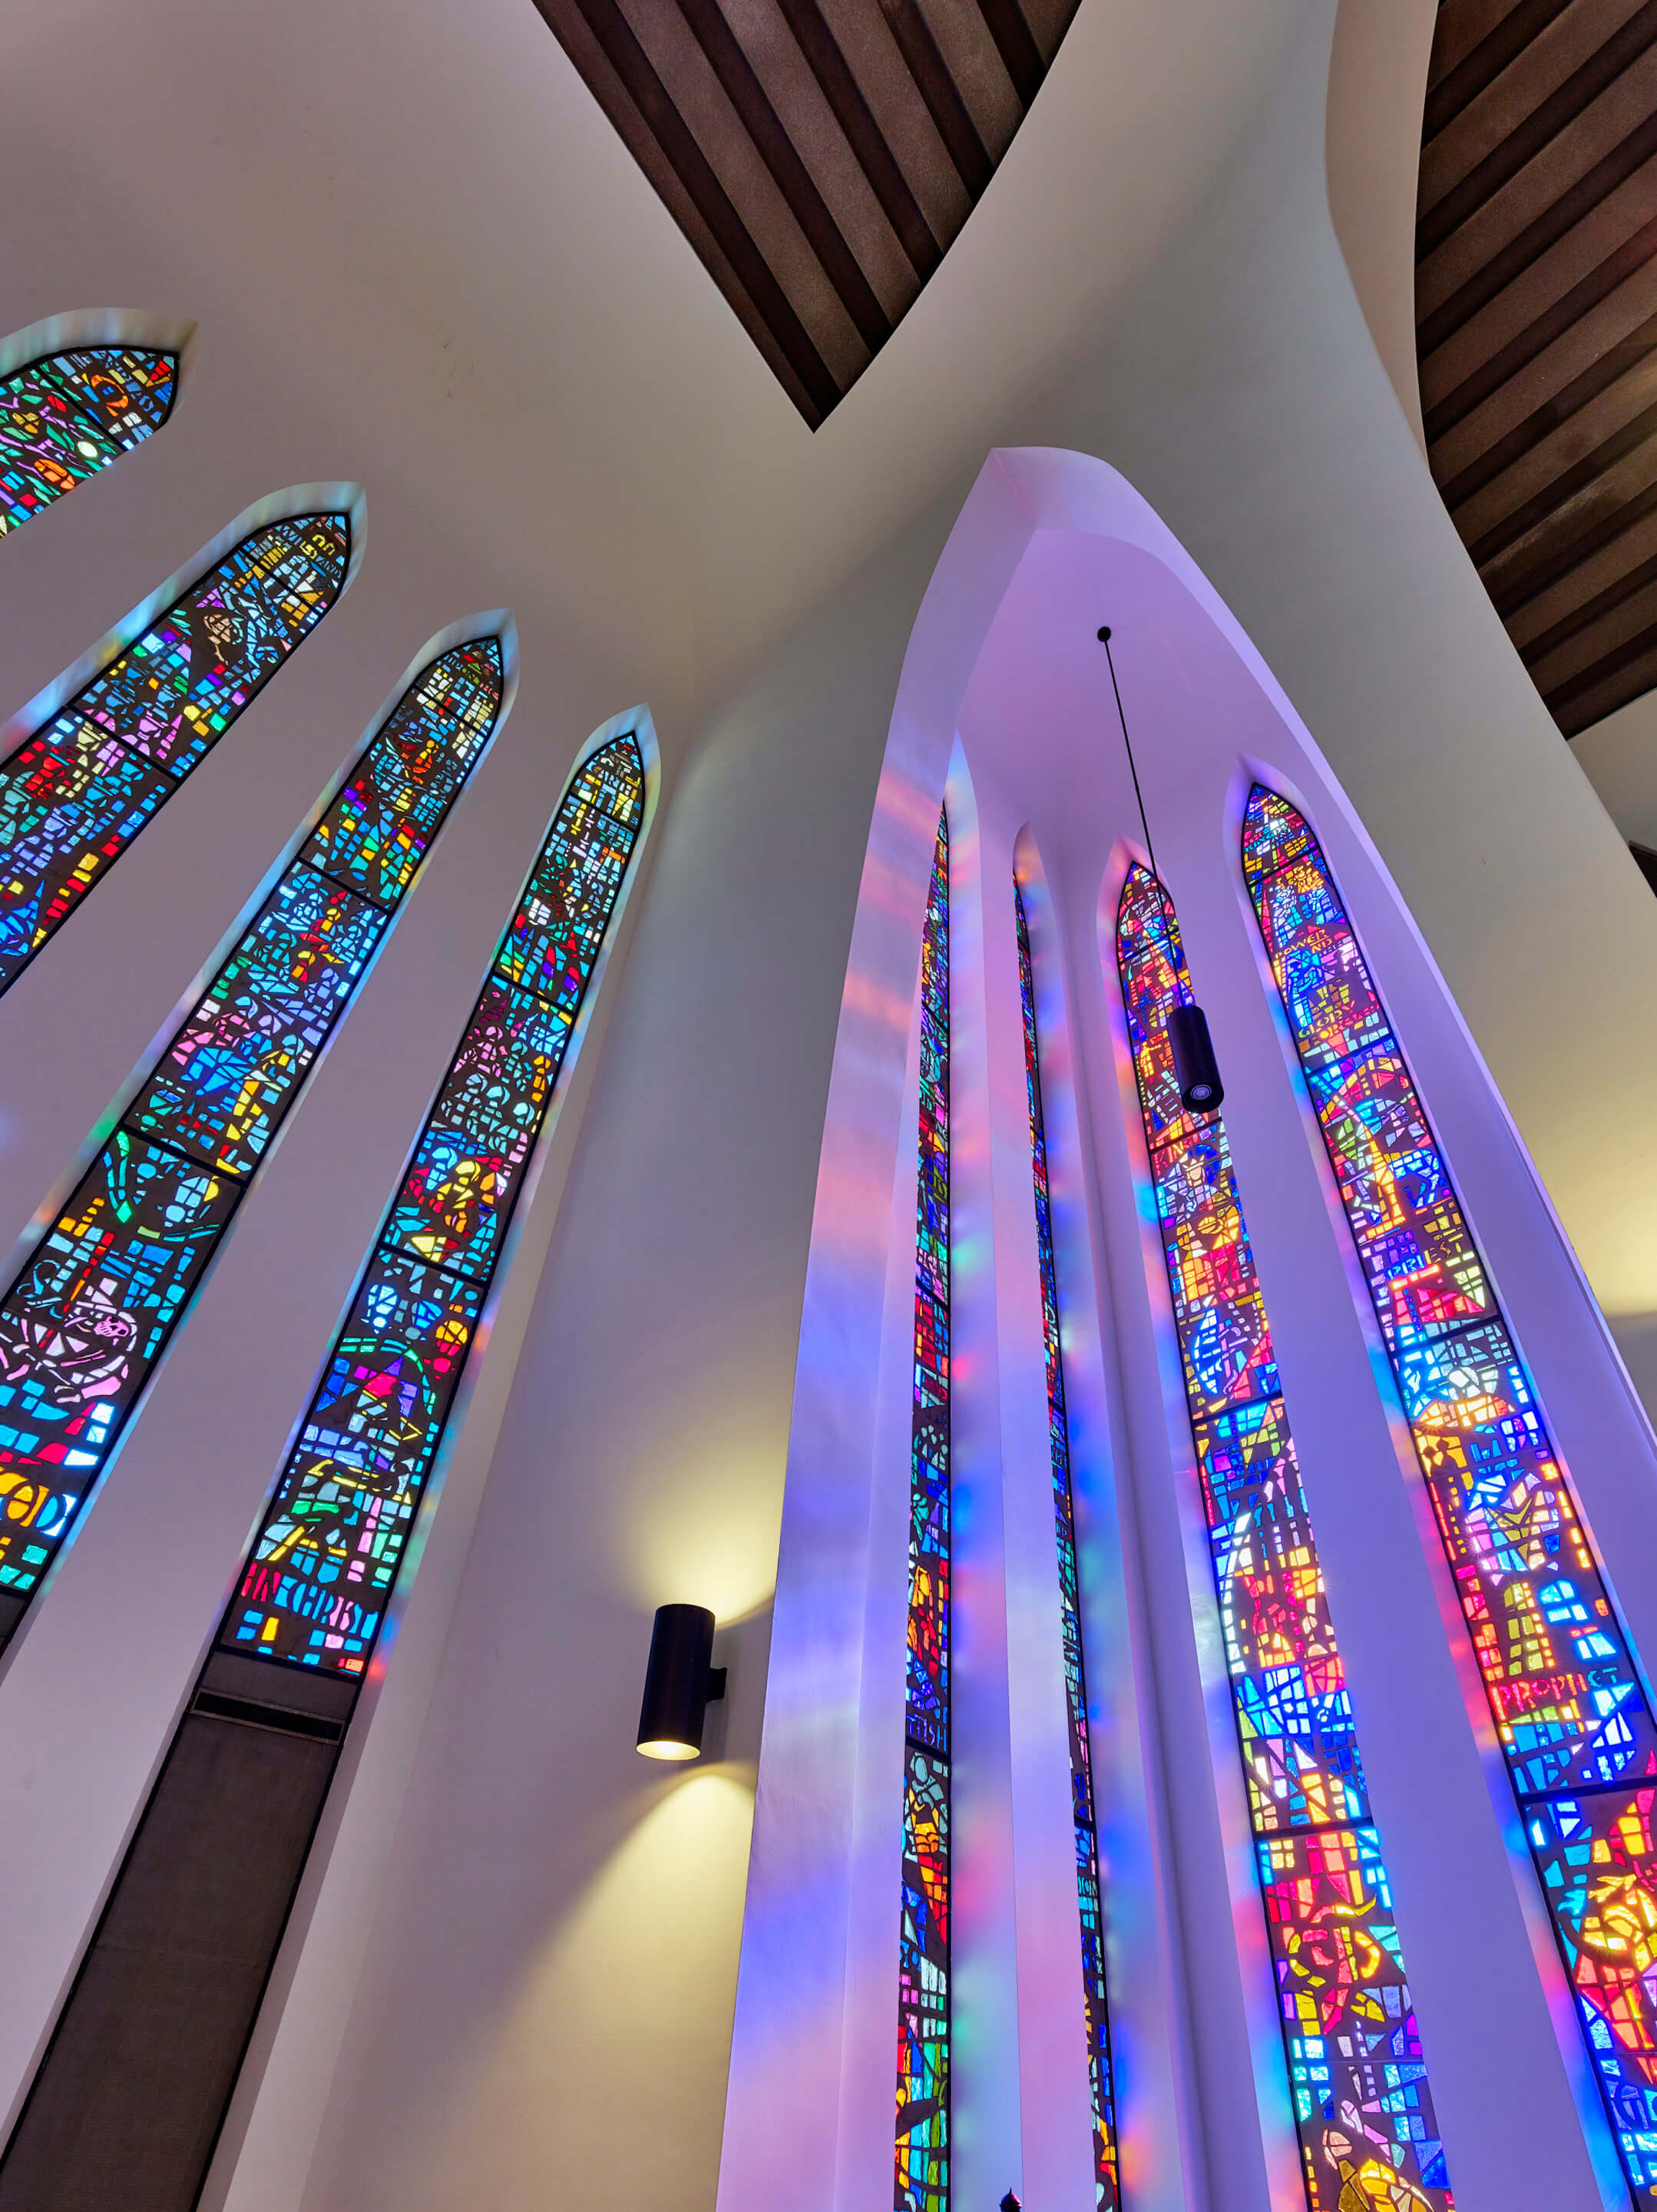 long vertical panes of stained glass in a modernist church